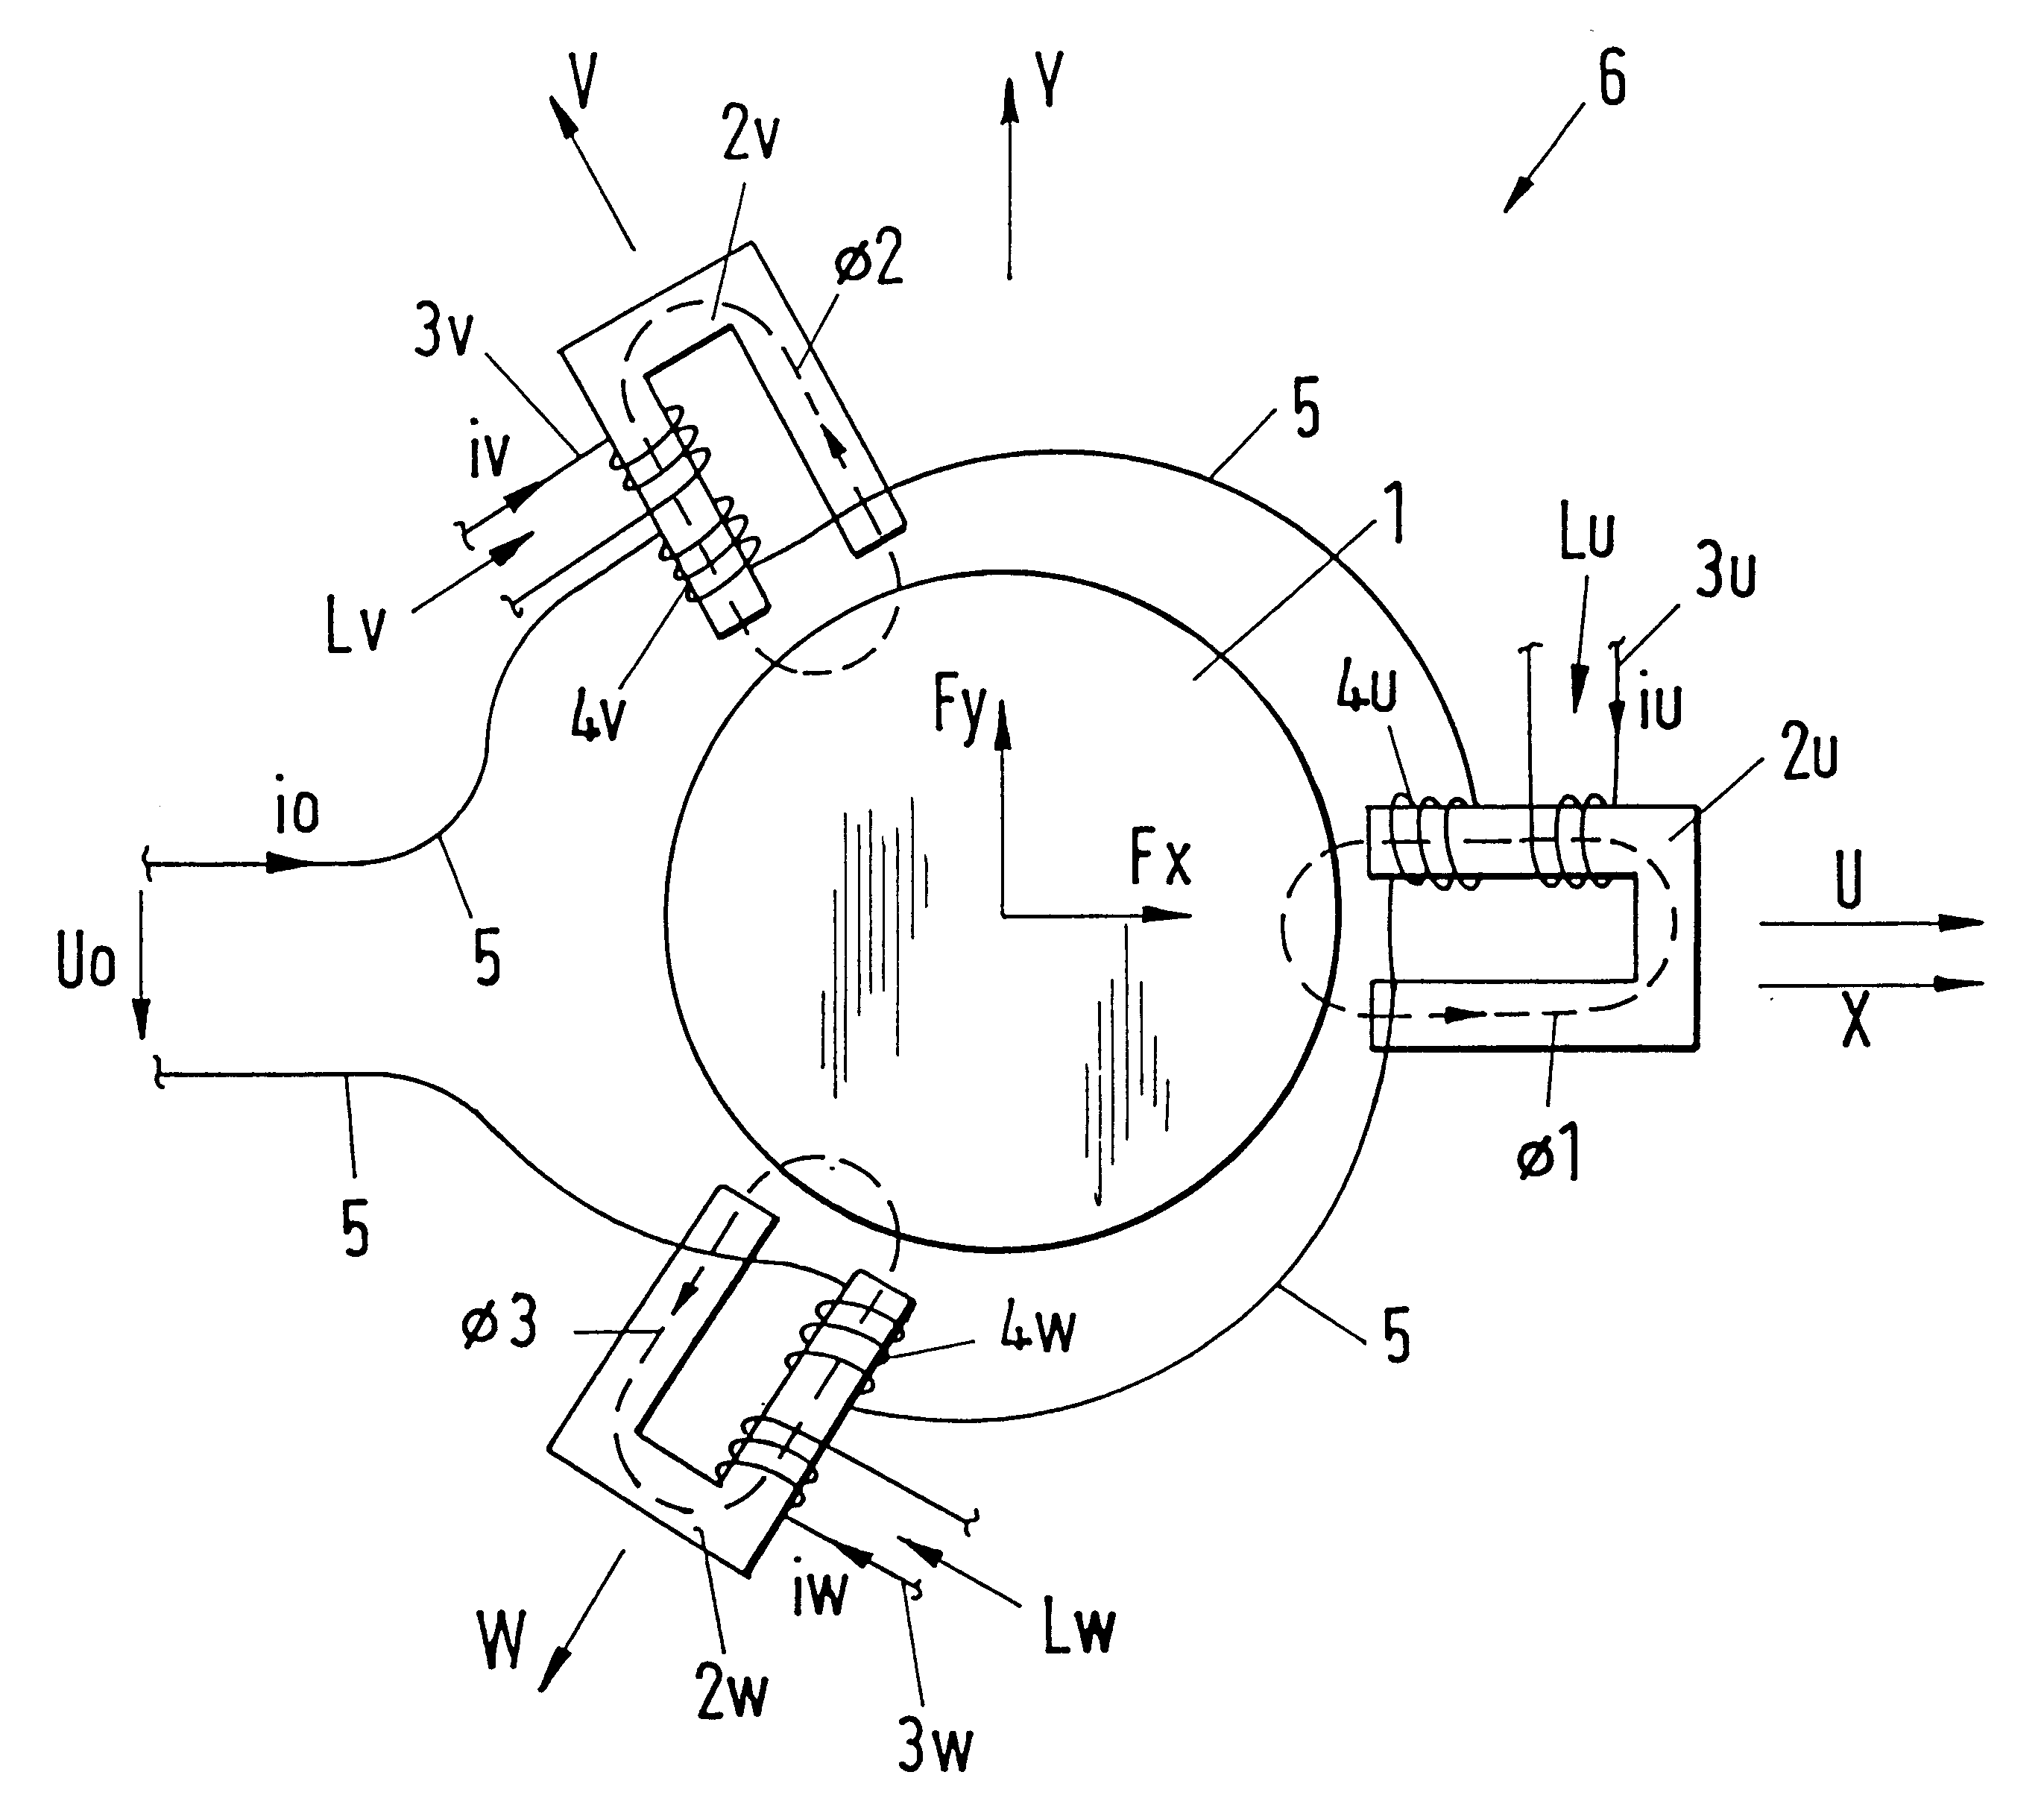 Radial active magnetic bearing apparatus and a method for operating the same